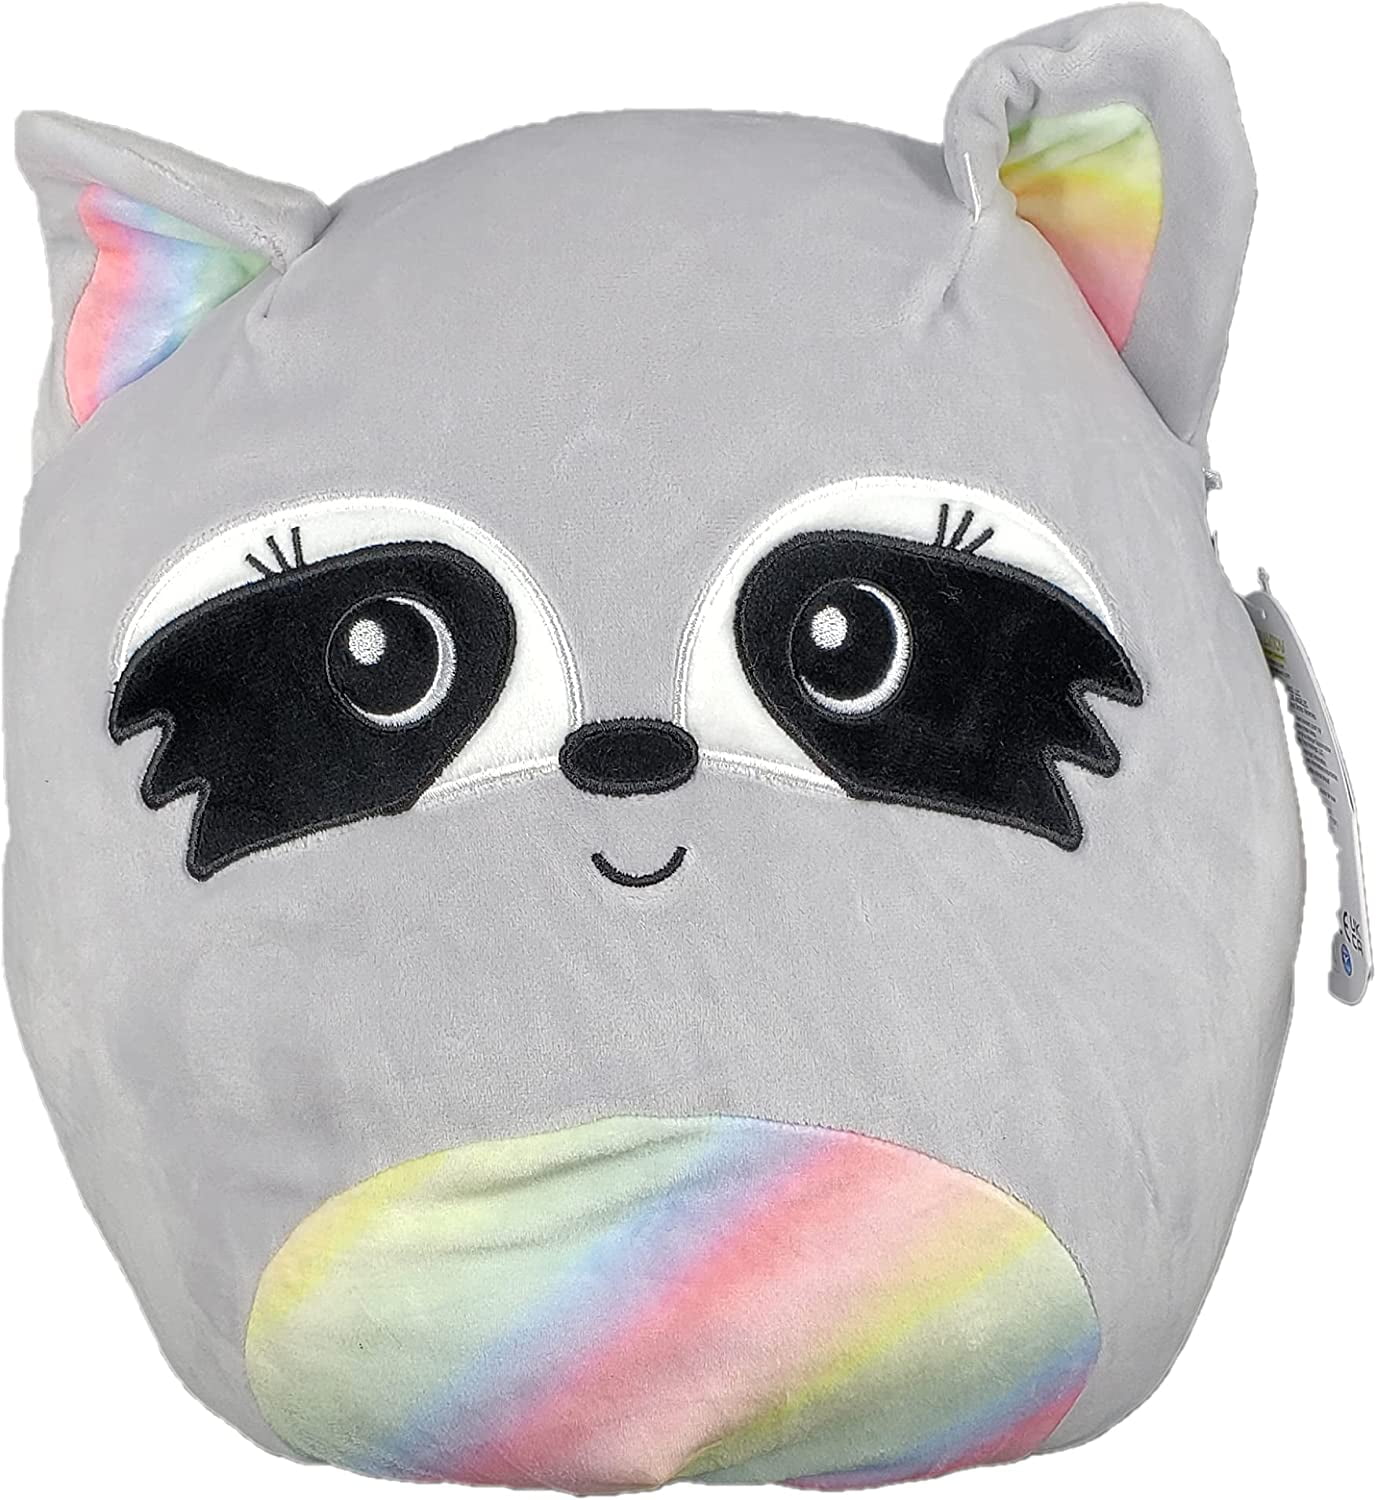 Kellytoy Squishmallow 8 Inch Max Racoon The  Super Soft Plush Free Ship 